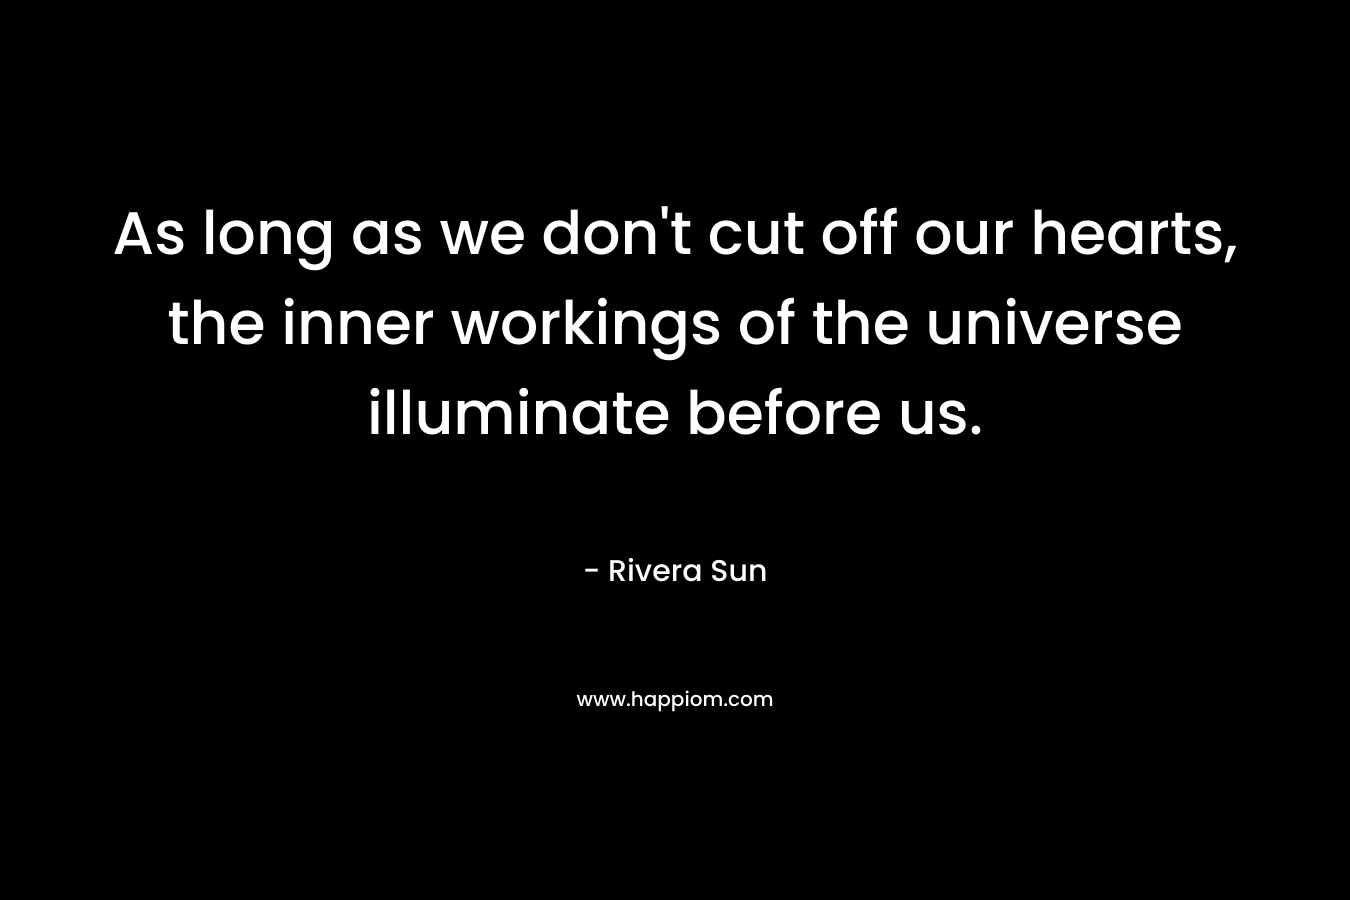 As long as we don't cut off our hearts, the inner workings of the universe illuminate before us.